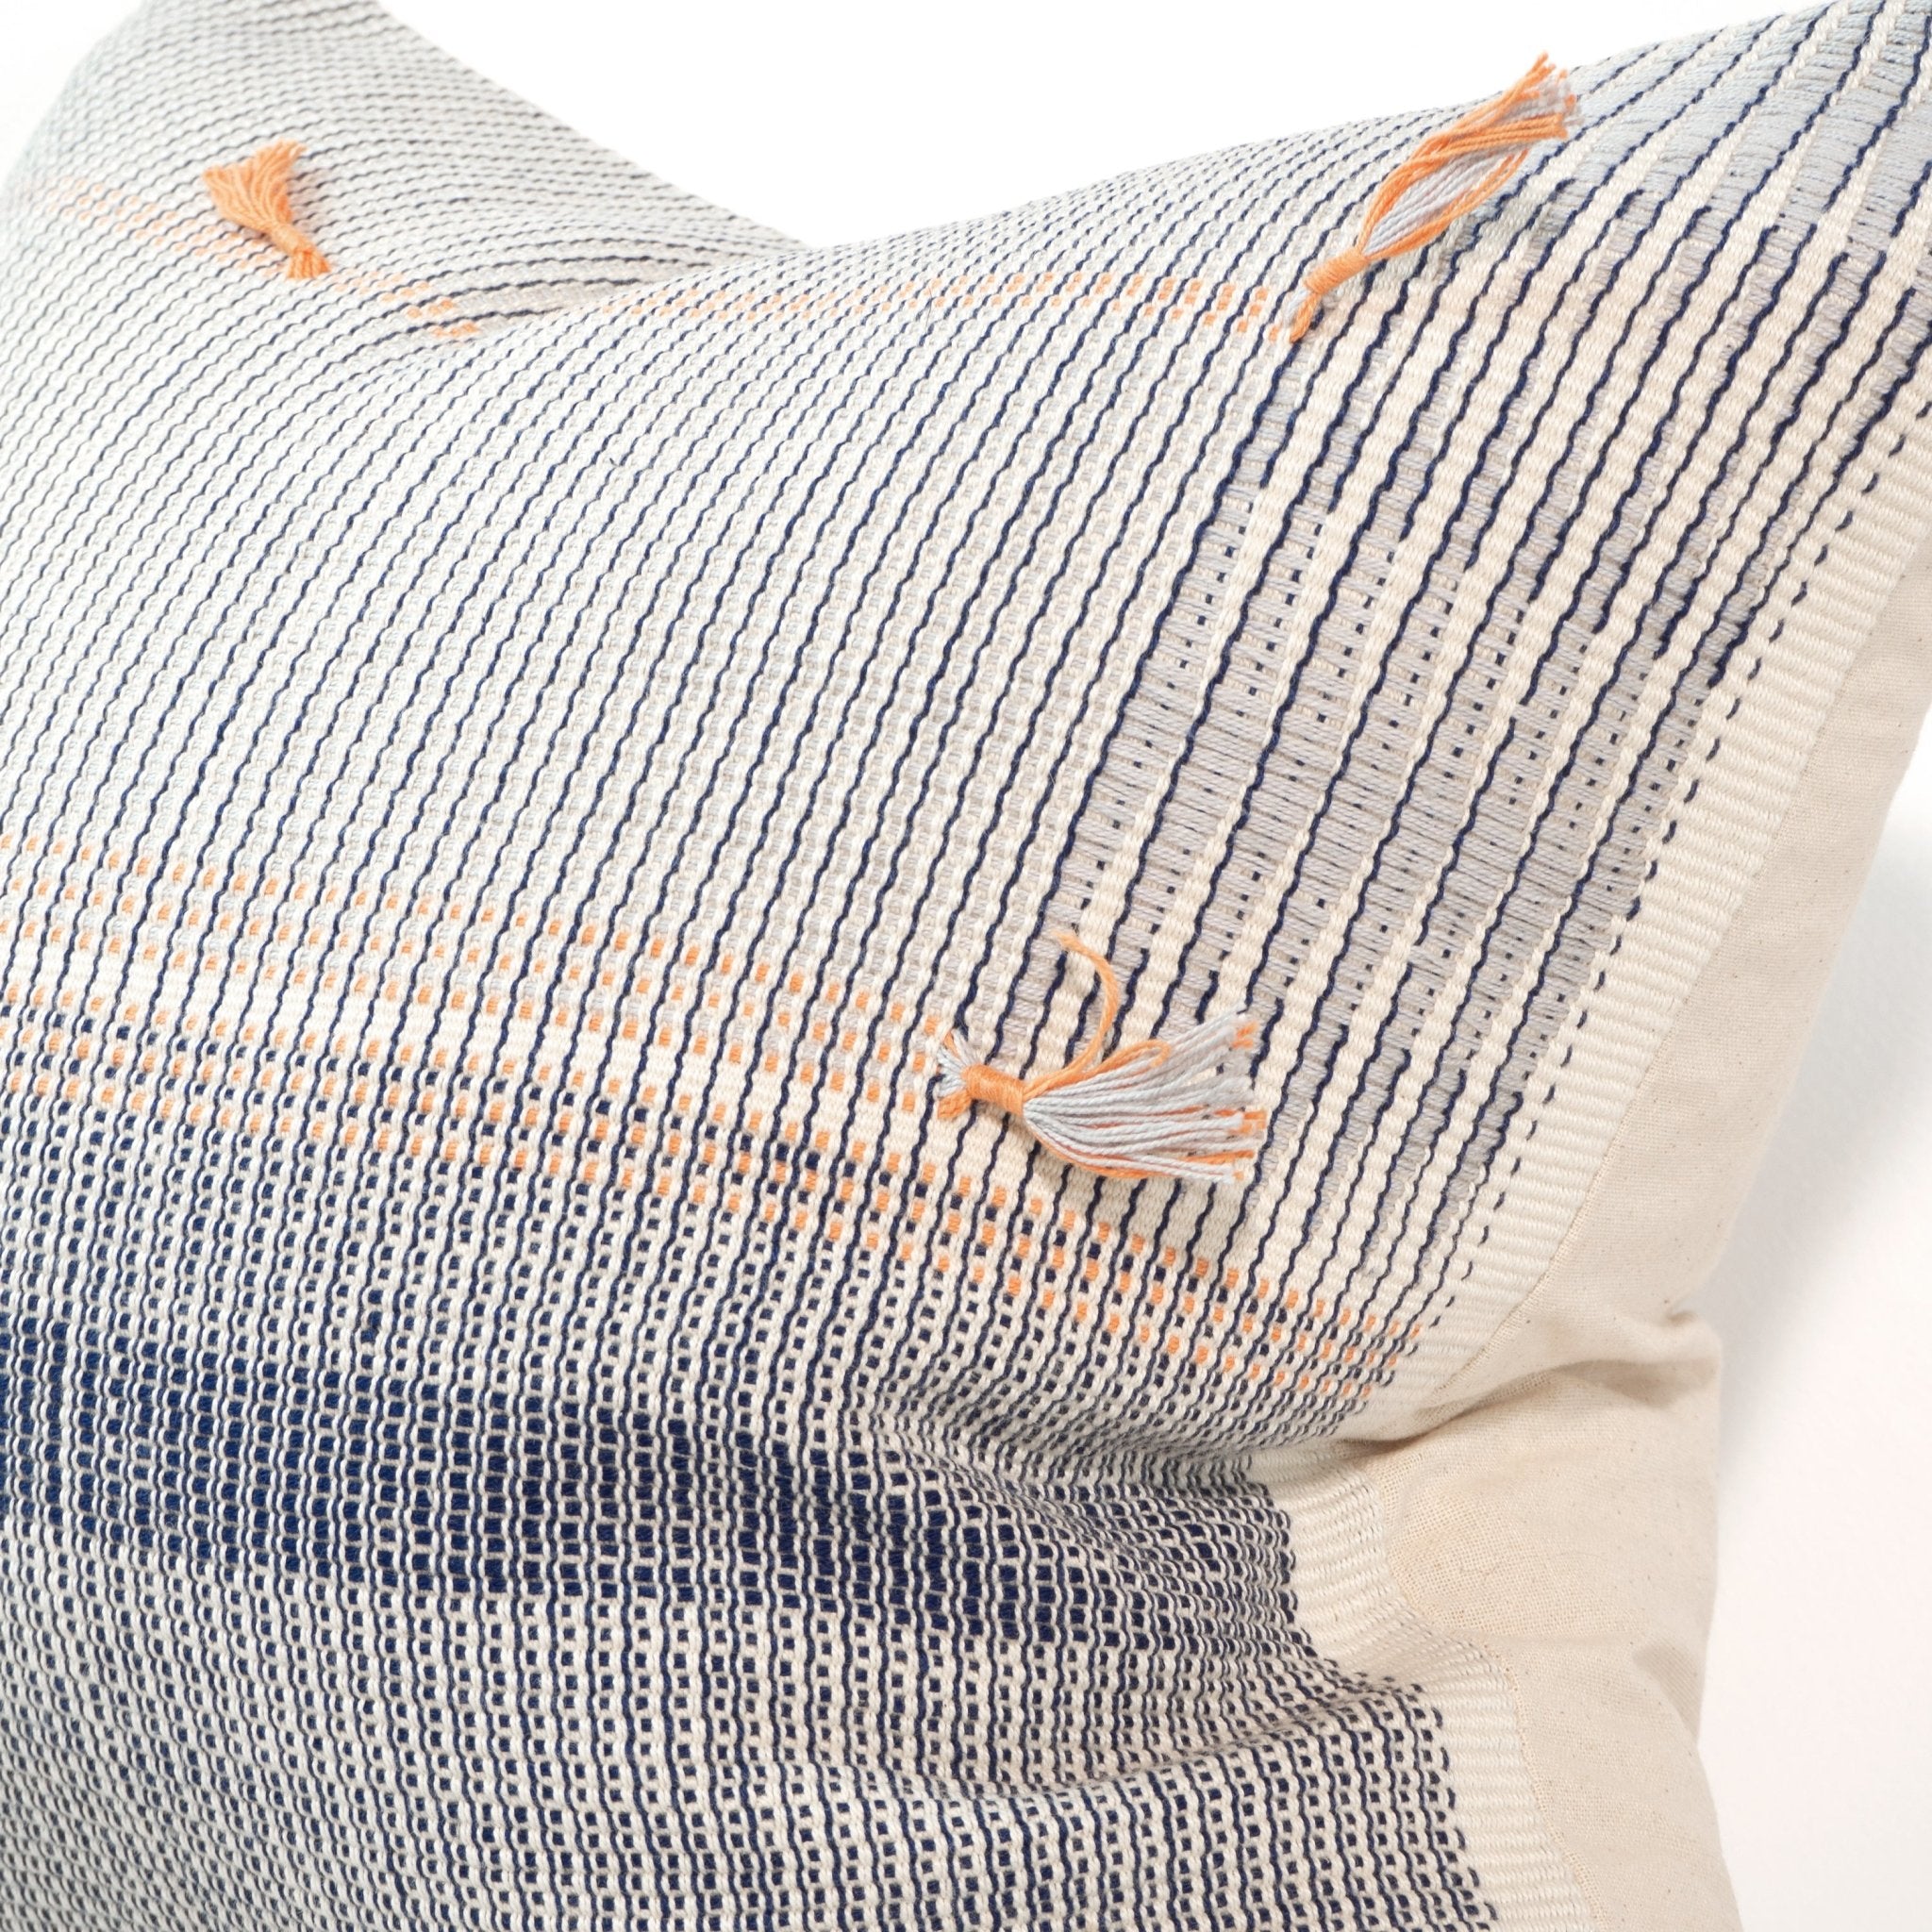 Handwoven white, navy and orange cotton square throw cushion from Nagaland, India